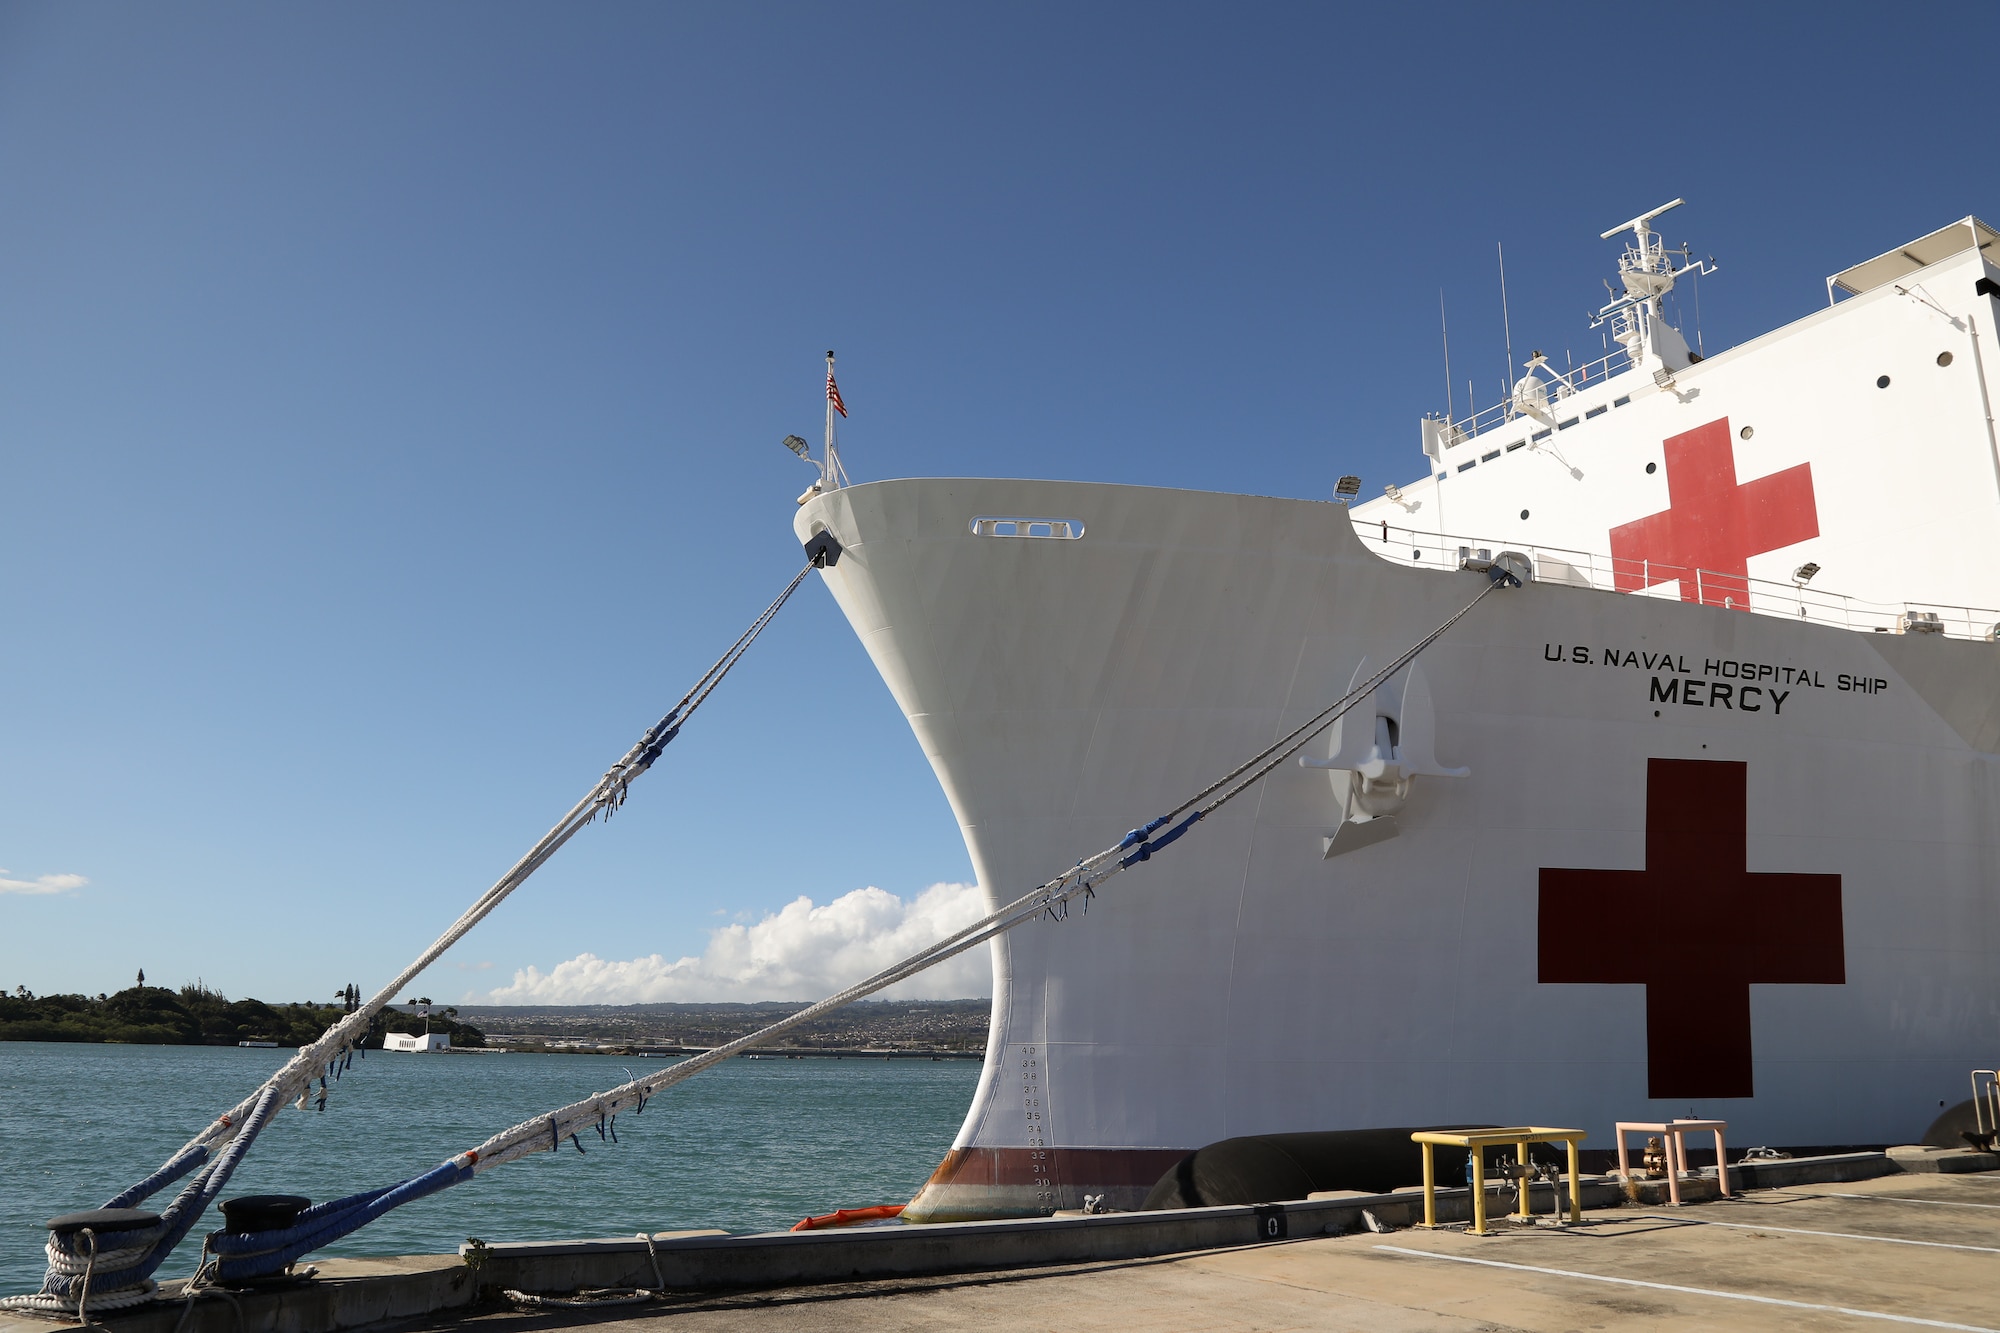 The USNS Mercy, docked alongside the USS Arizona Memorial July 9, 2018, on Joint Base Pearl Harbor – Hickam is a hospital ship that provides various medical services in the event of crisis. Of interest to members of the 446th Aeromedical Squadron are not only capabilities but how patient movement is accomplished. (U.S. Air Force photo by David L. Yost)